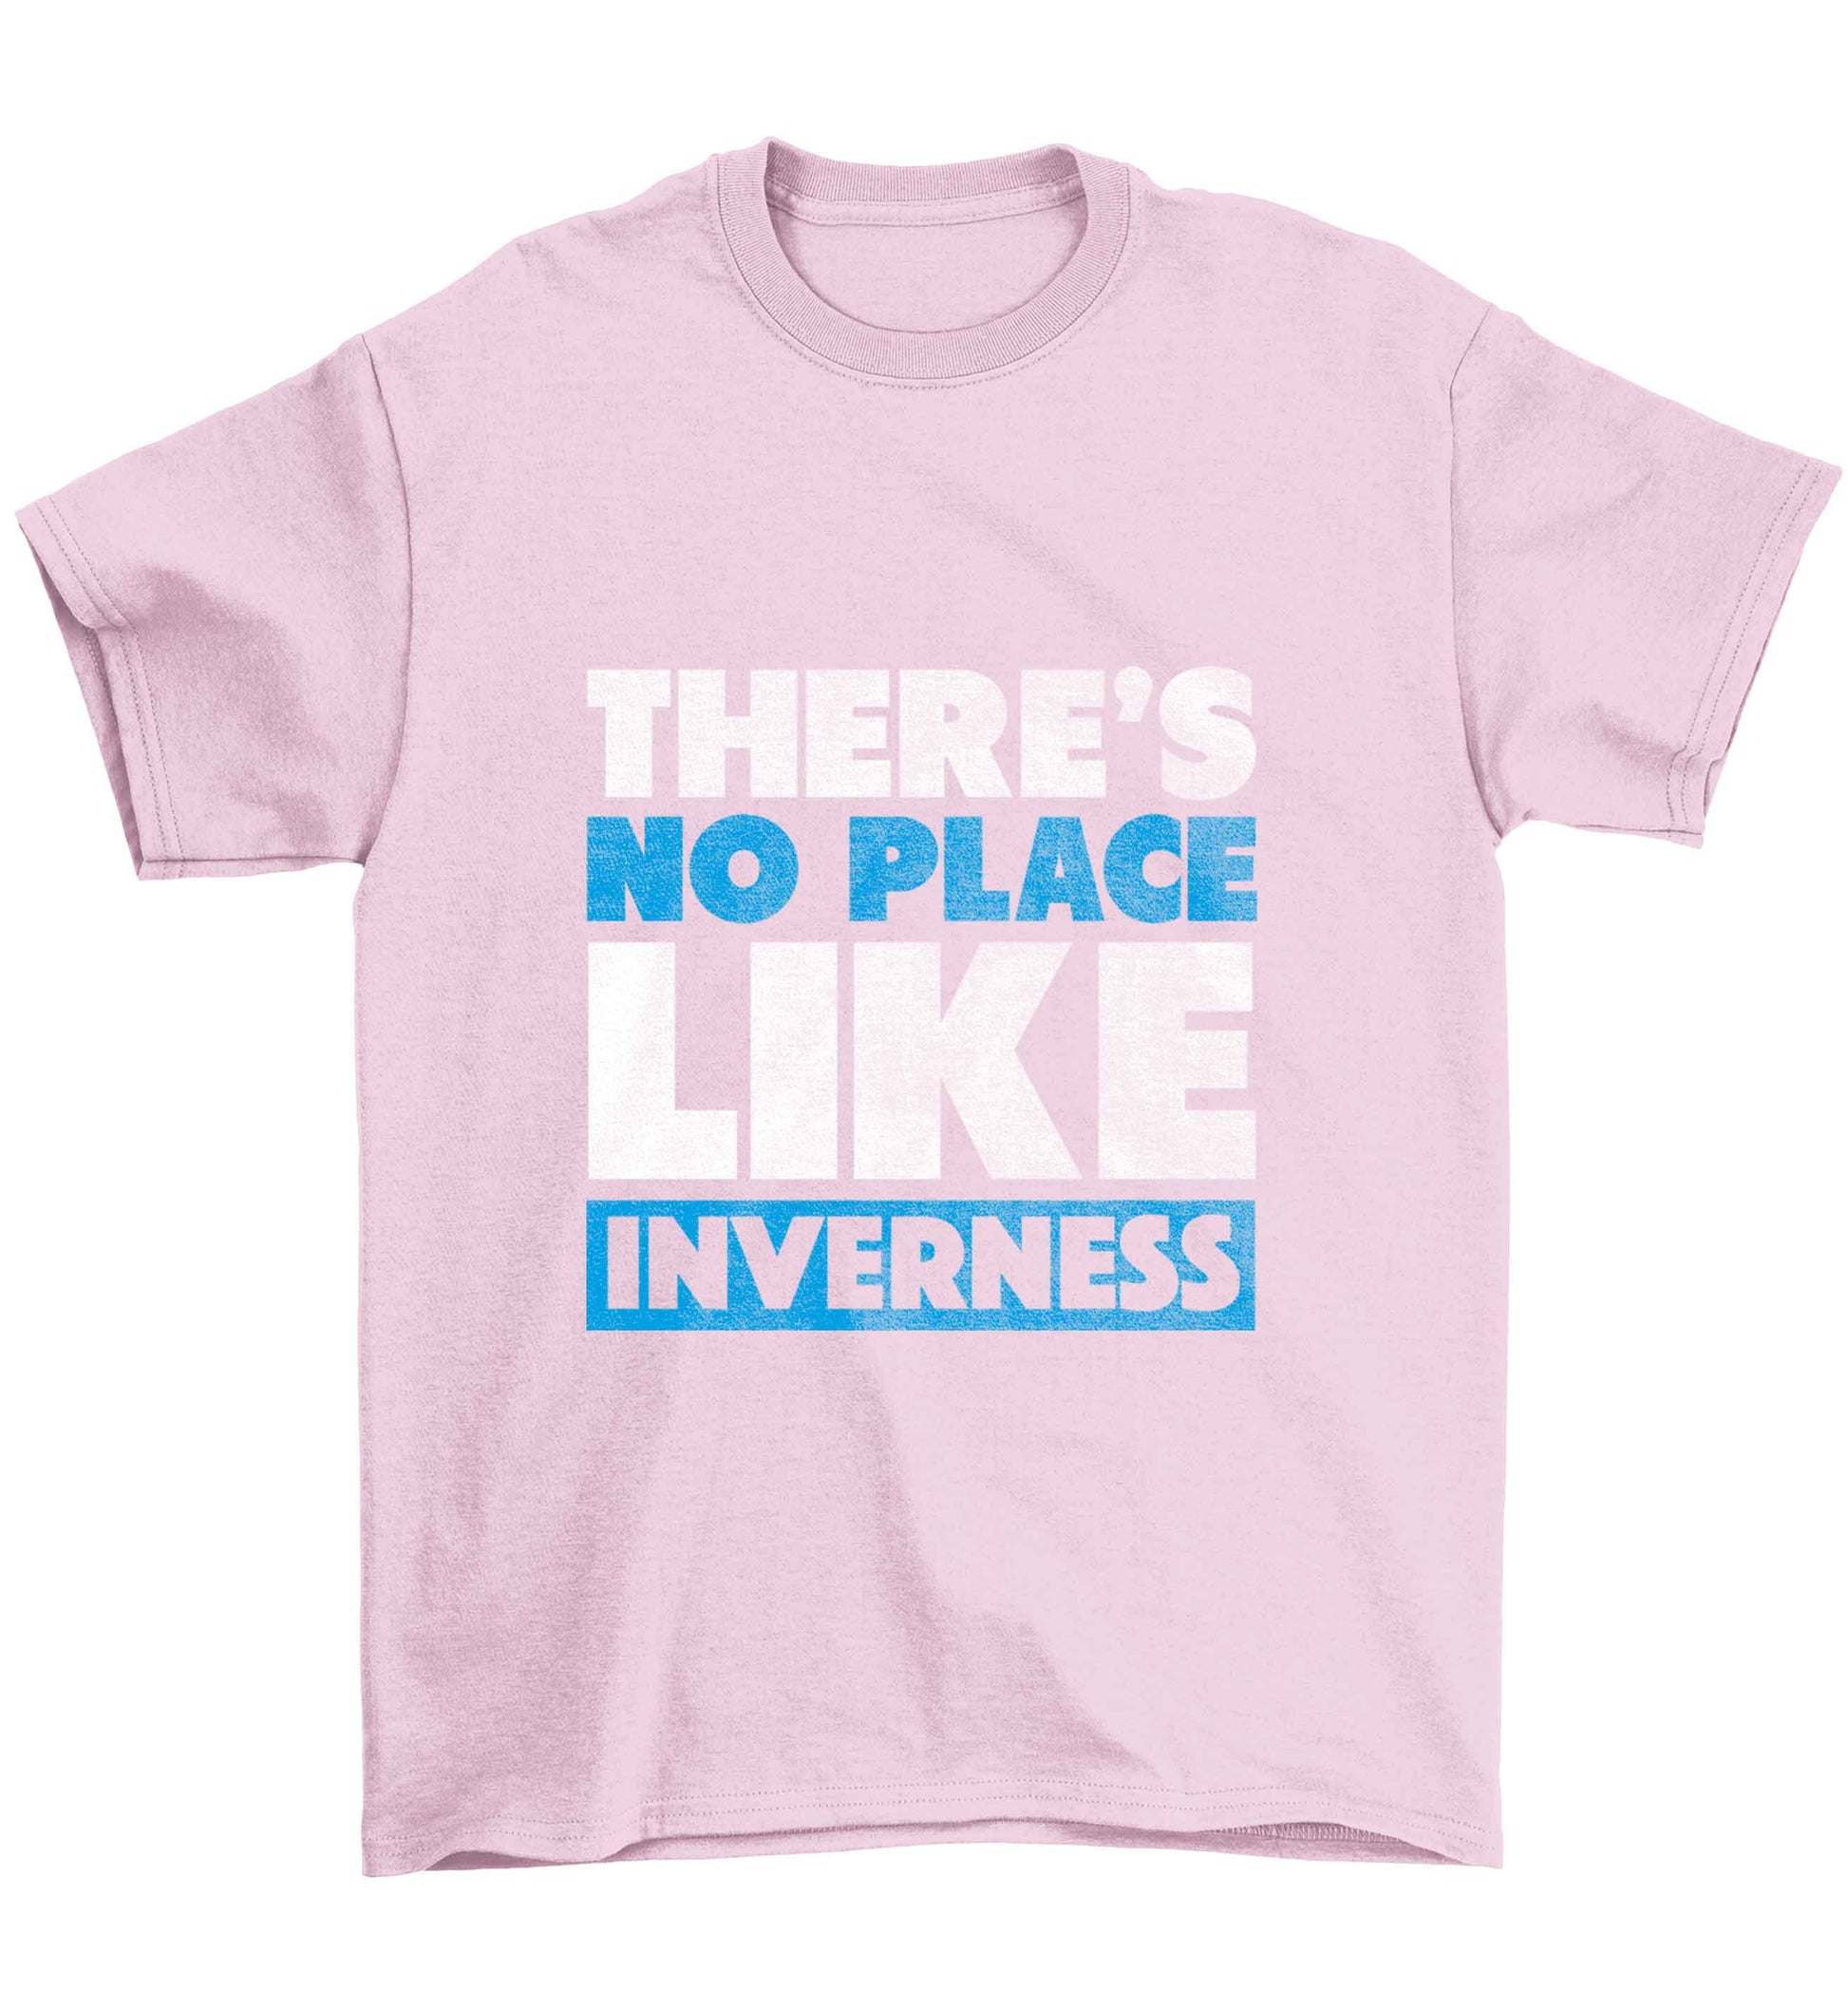 There's no place like Inverness Children's light pink Tshirt 12-13 Years